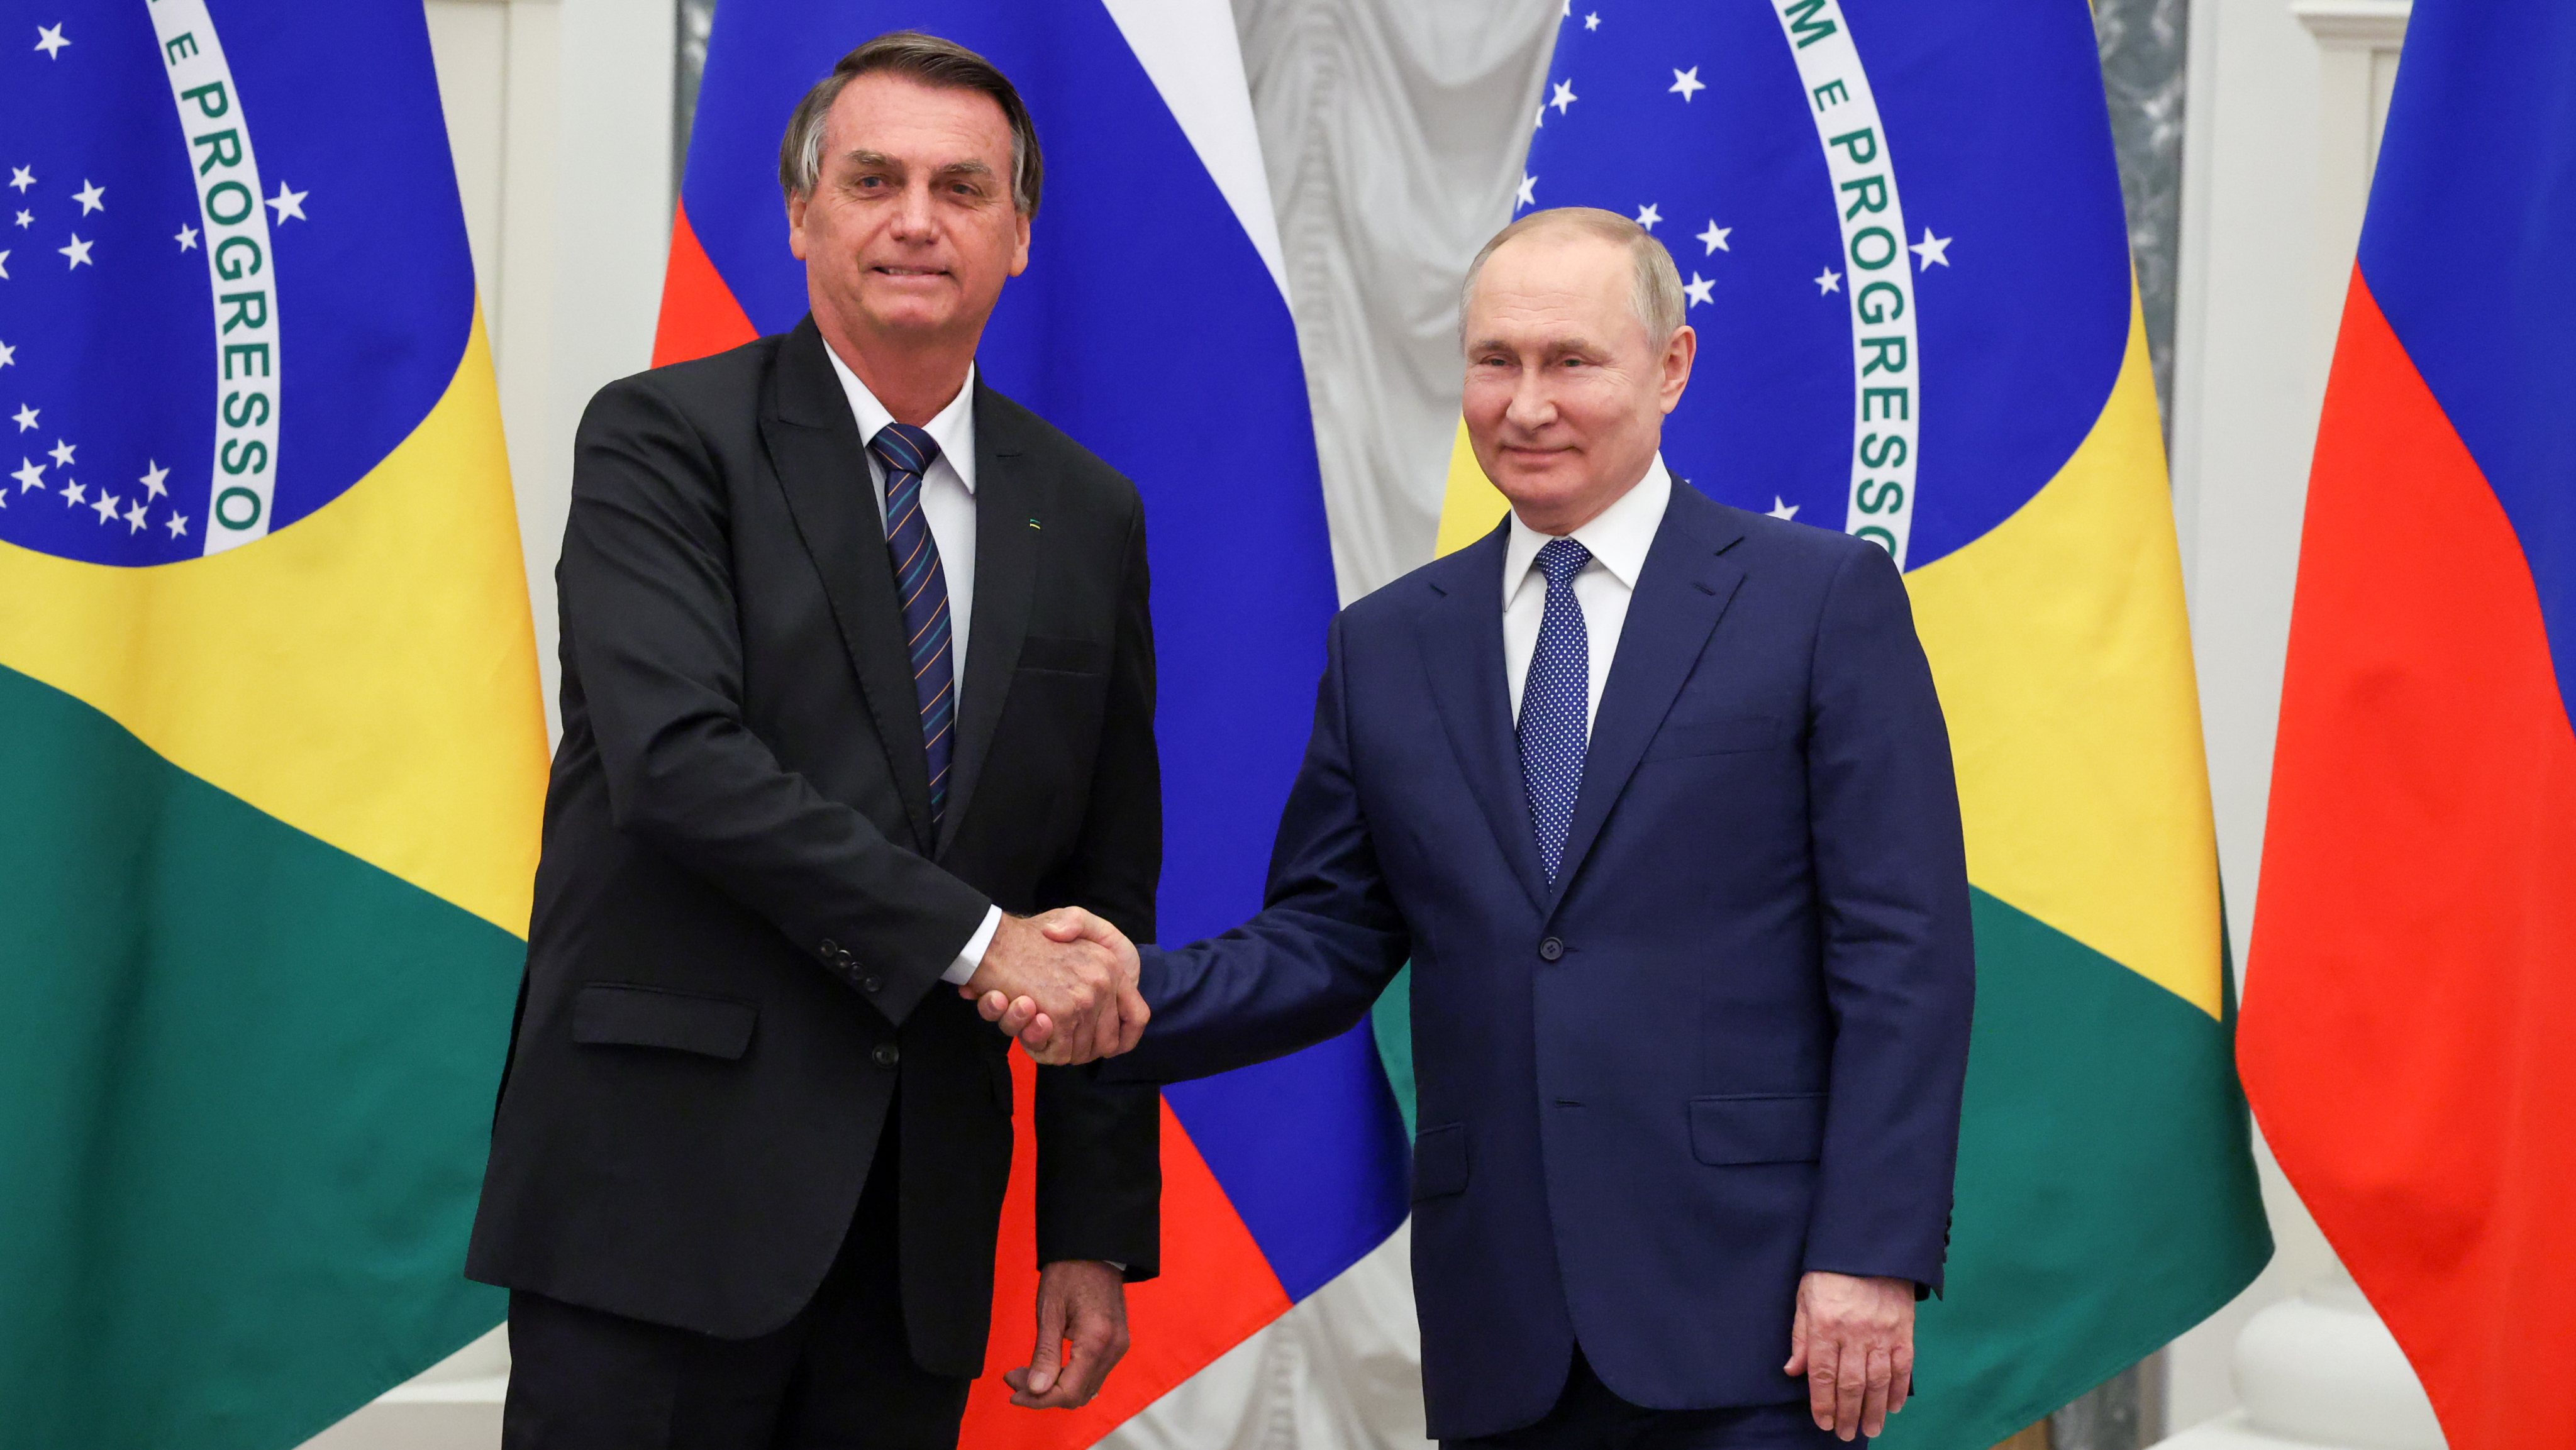 Presidents of Russia and Brazil meet in Moscow